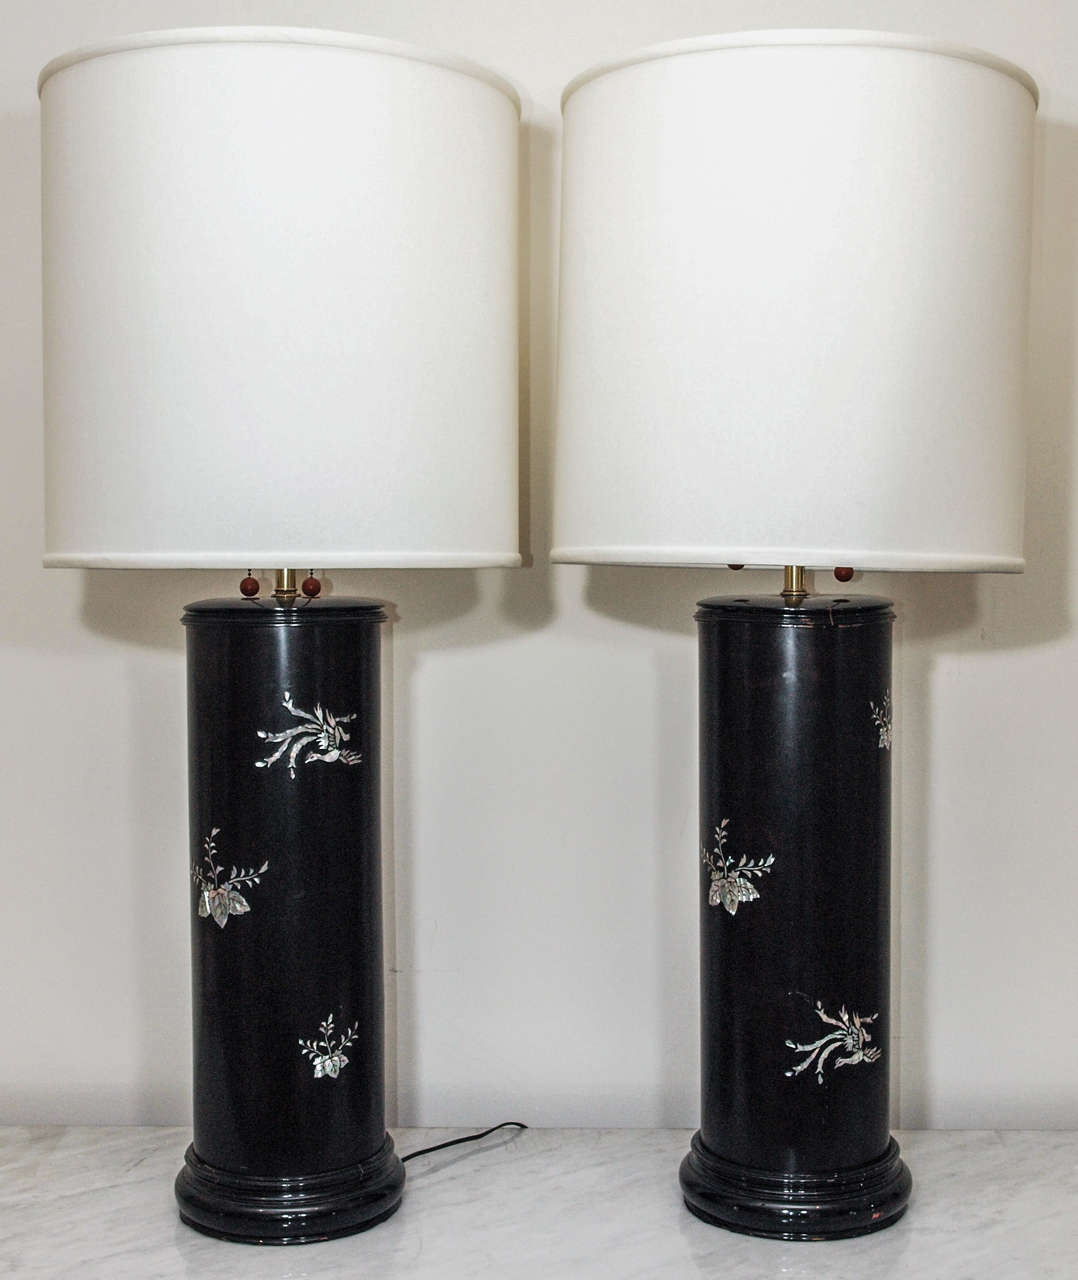 Two quite large table lamps in ebonized wood with intricate inlay in mother-of-pearl; each having two lights with individual pull chains; drum shades in ivory silk; base measures 8.5" diameter